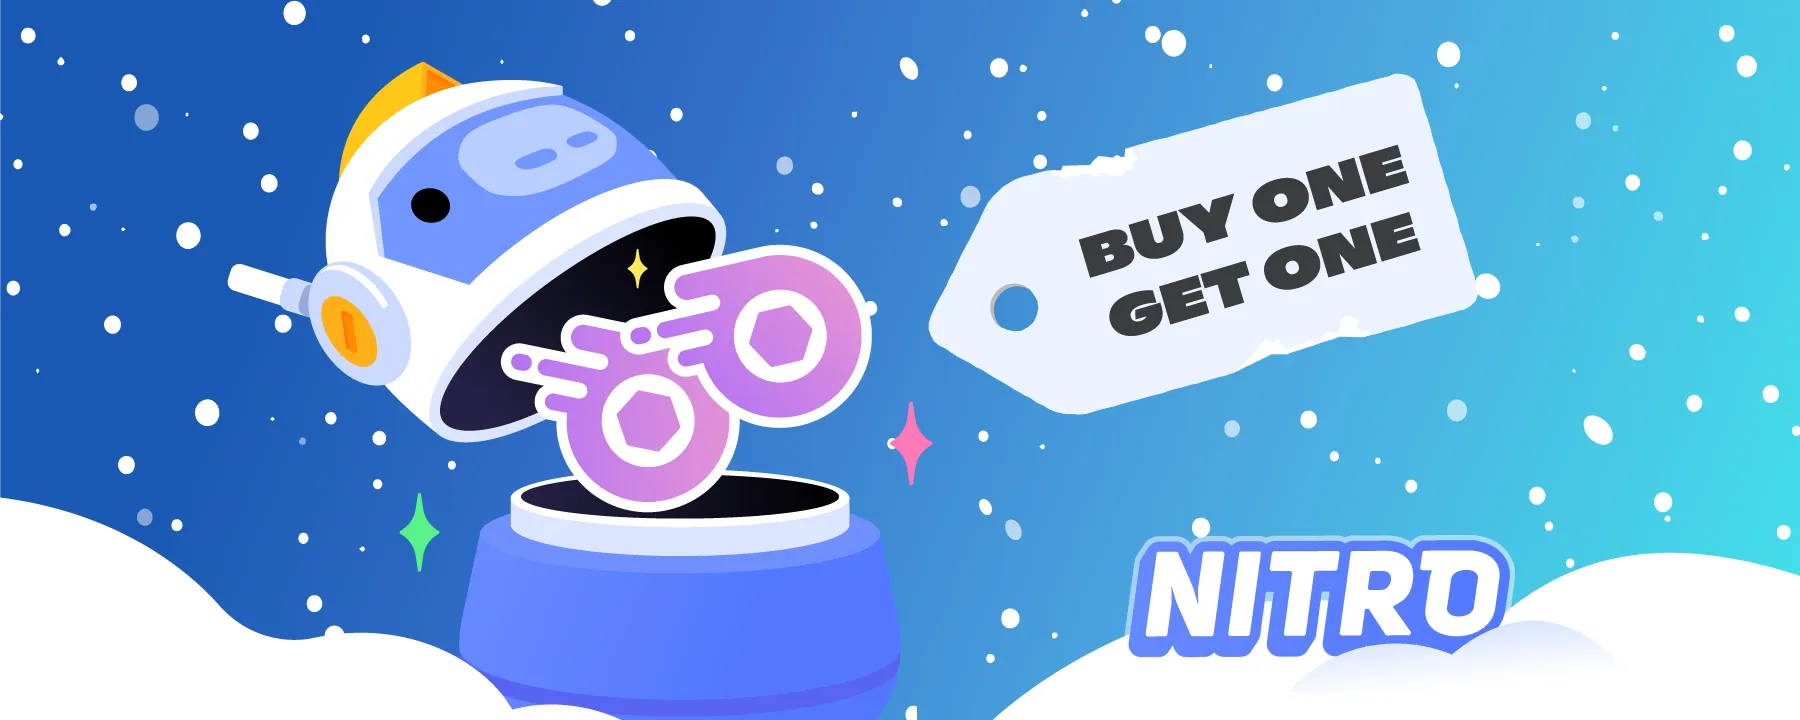 How To Get Discord Nitro For Free